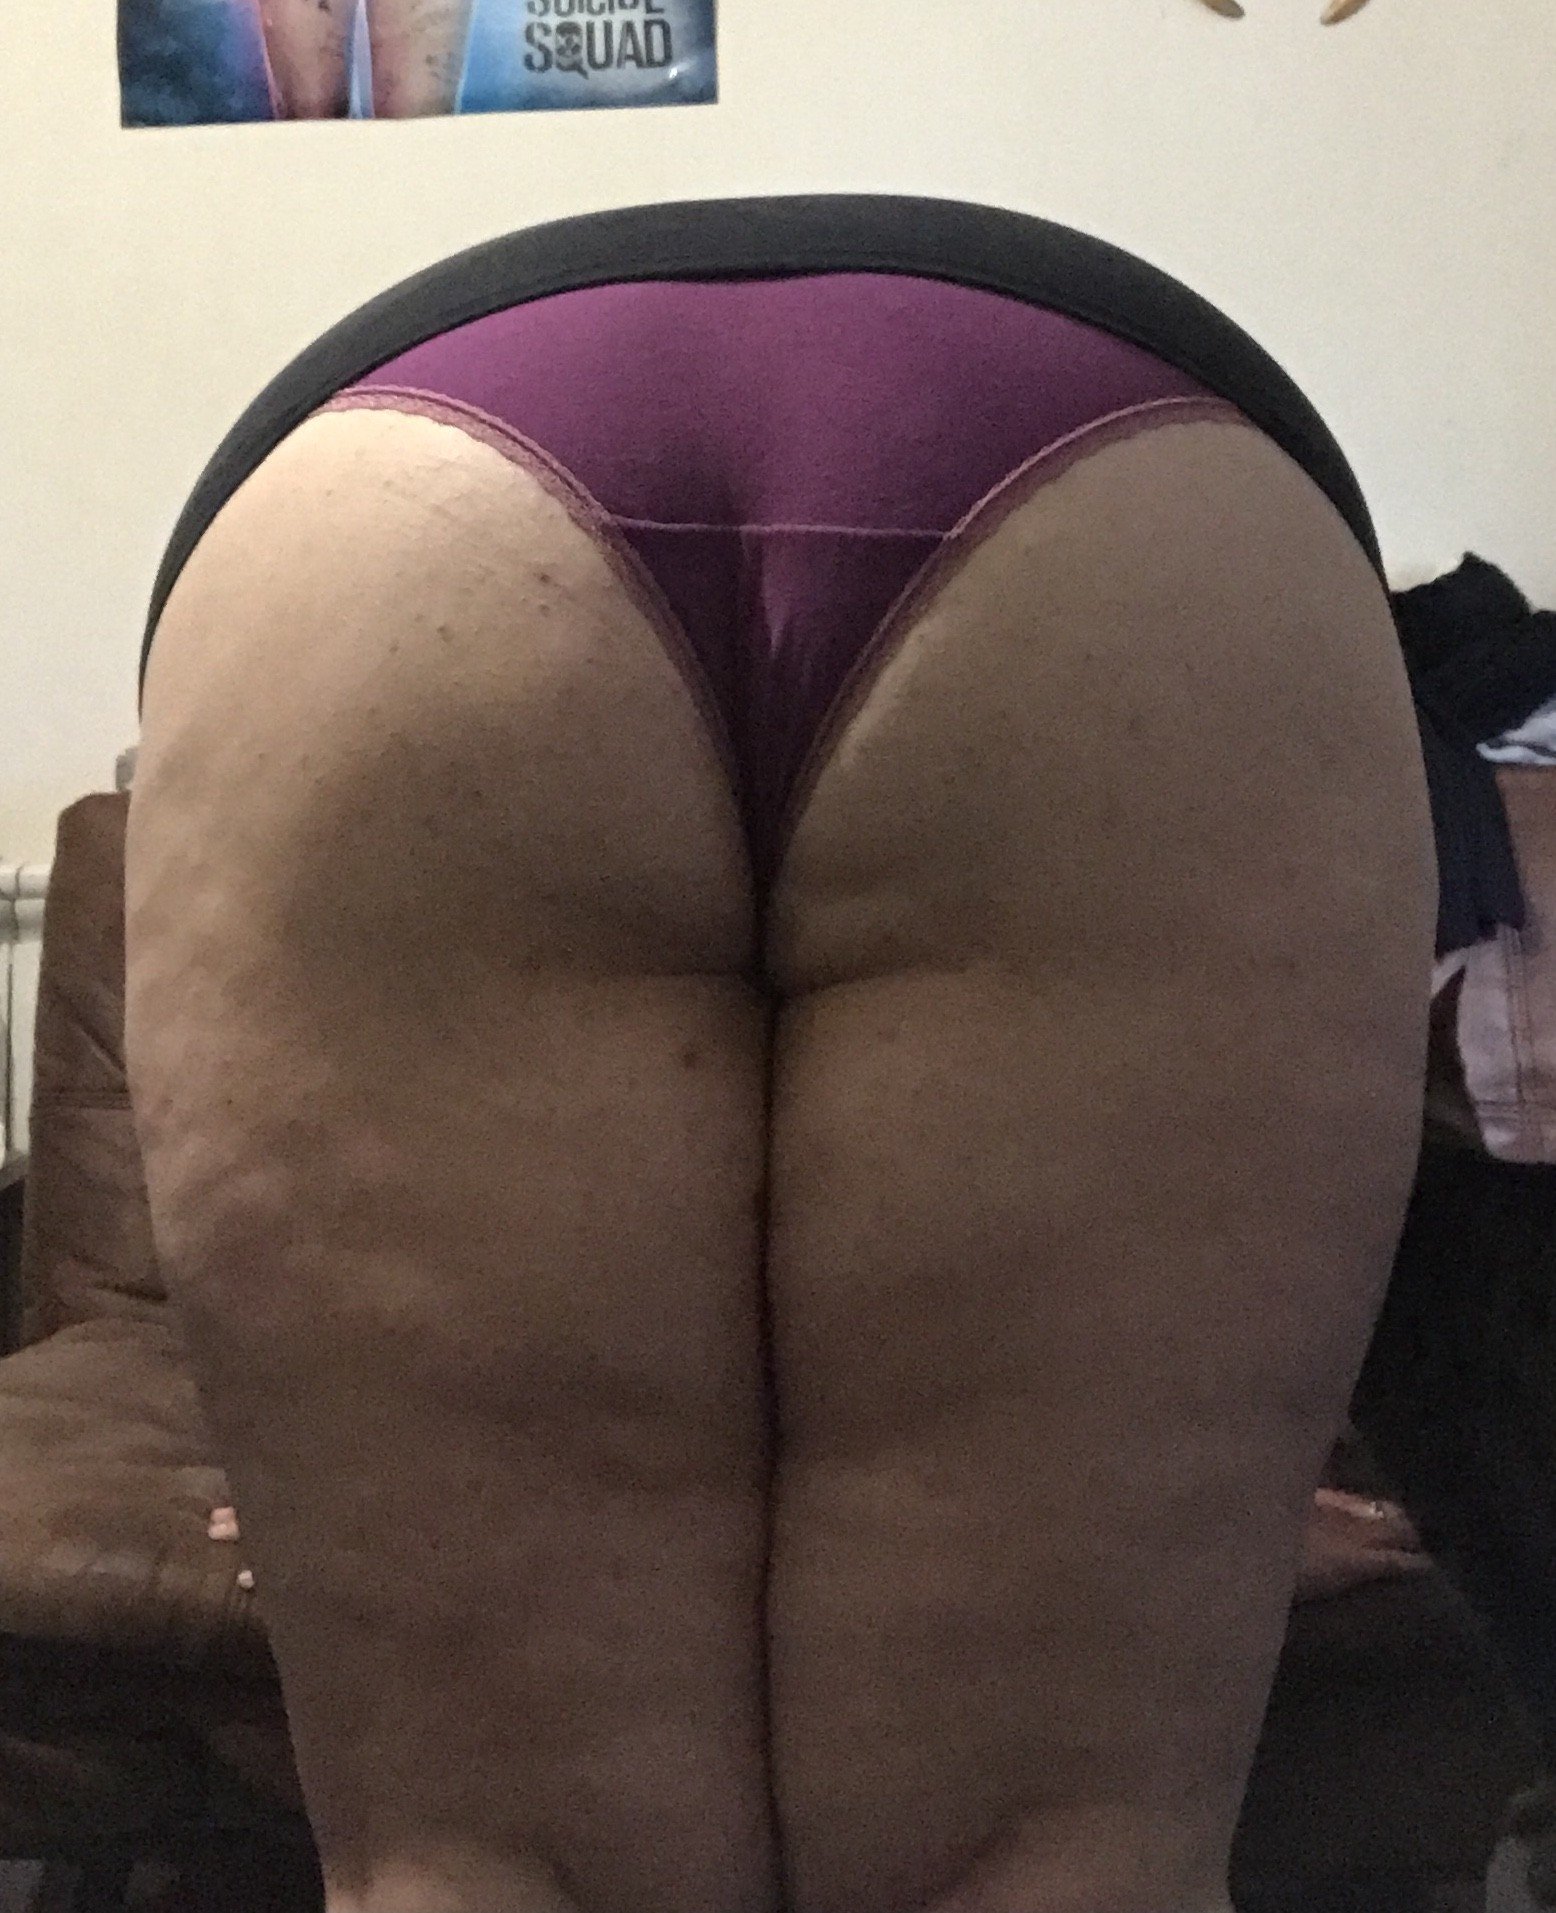 Watch the Photo by CurvyAngel149 with the username @CurvyAngel149, posted on October 29, 2020. The post is about the topic Sexy BBWs. and the text says 'Anyway want to help me remove these :p'